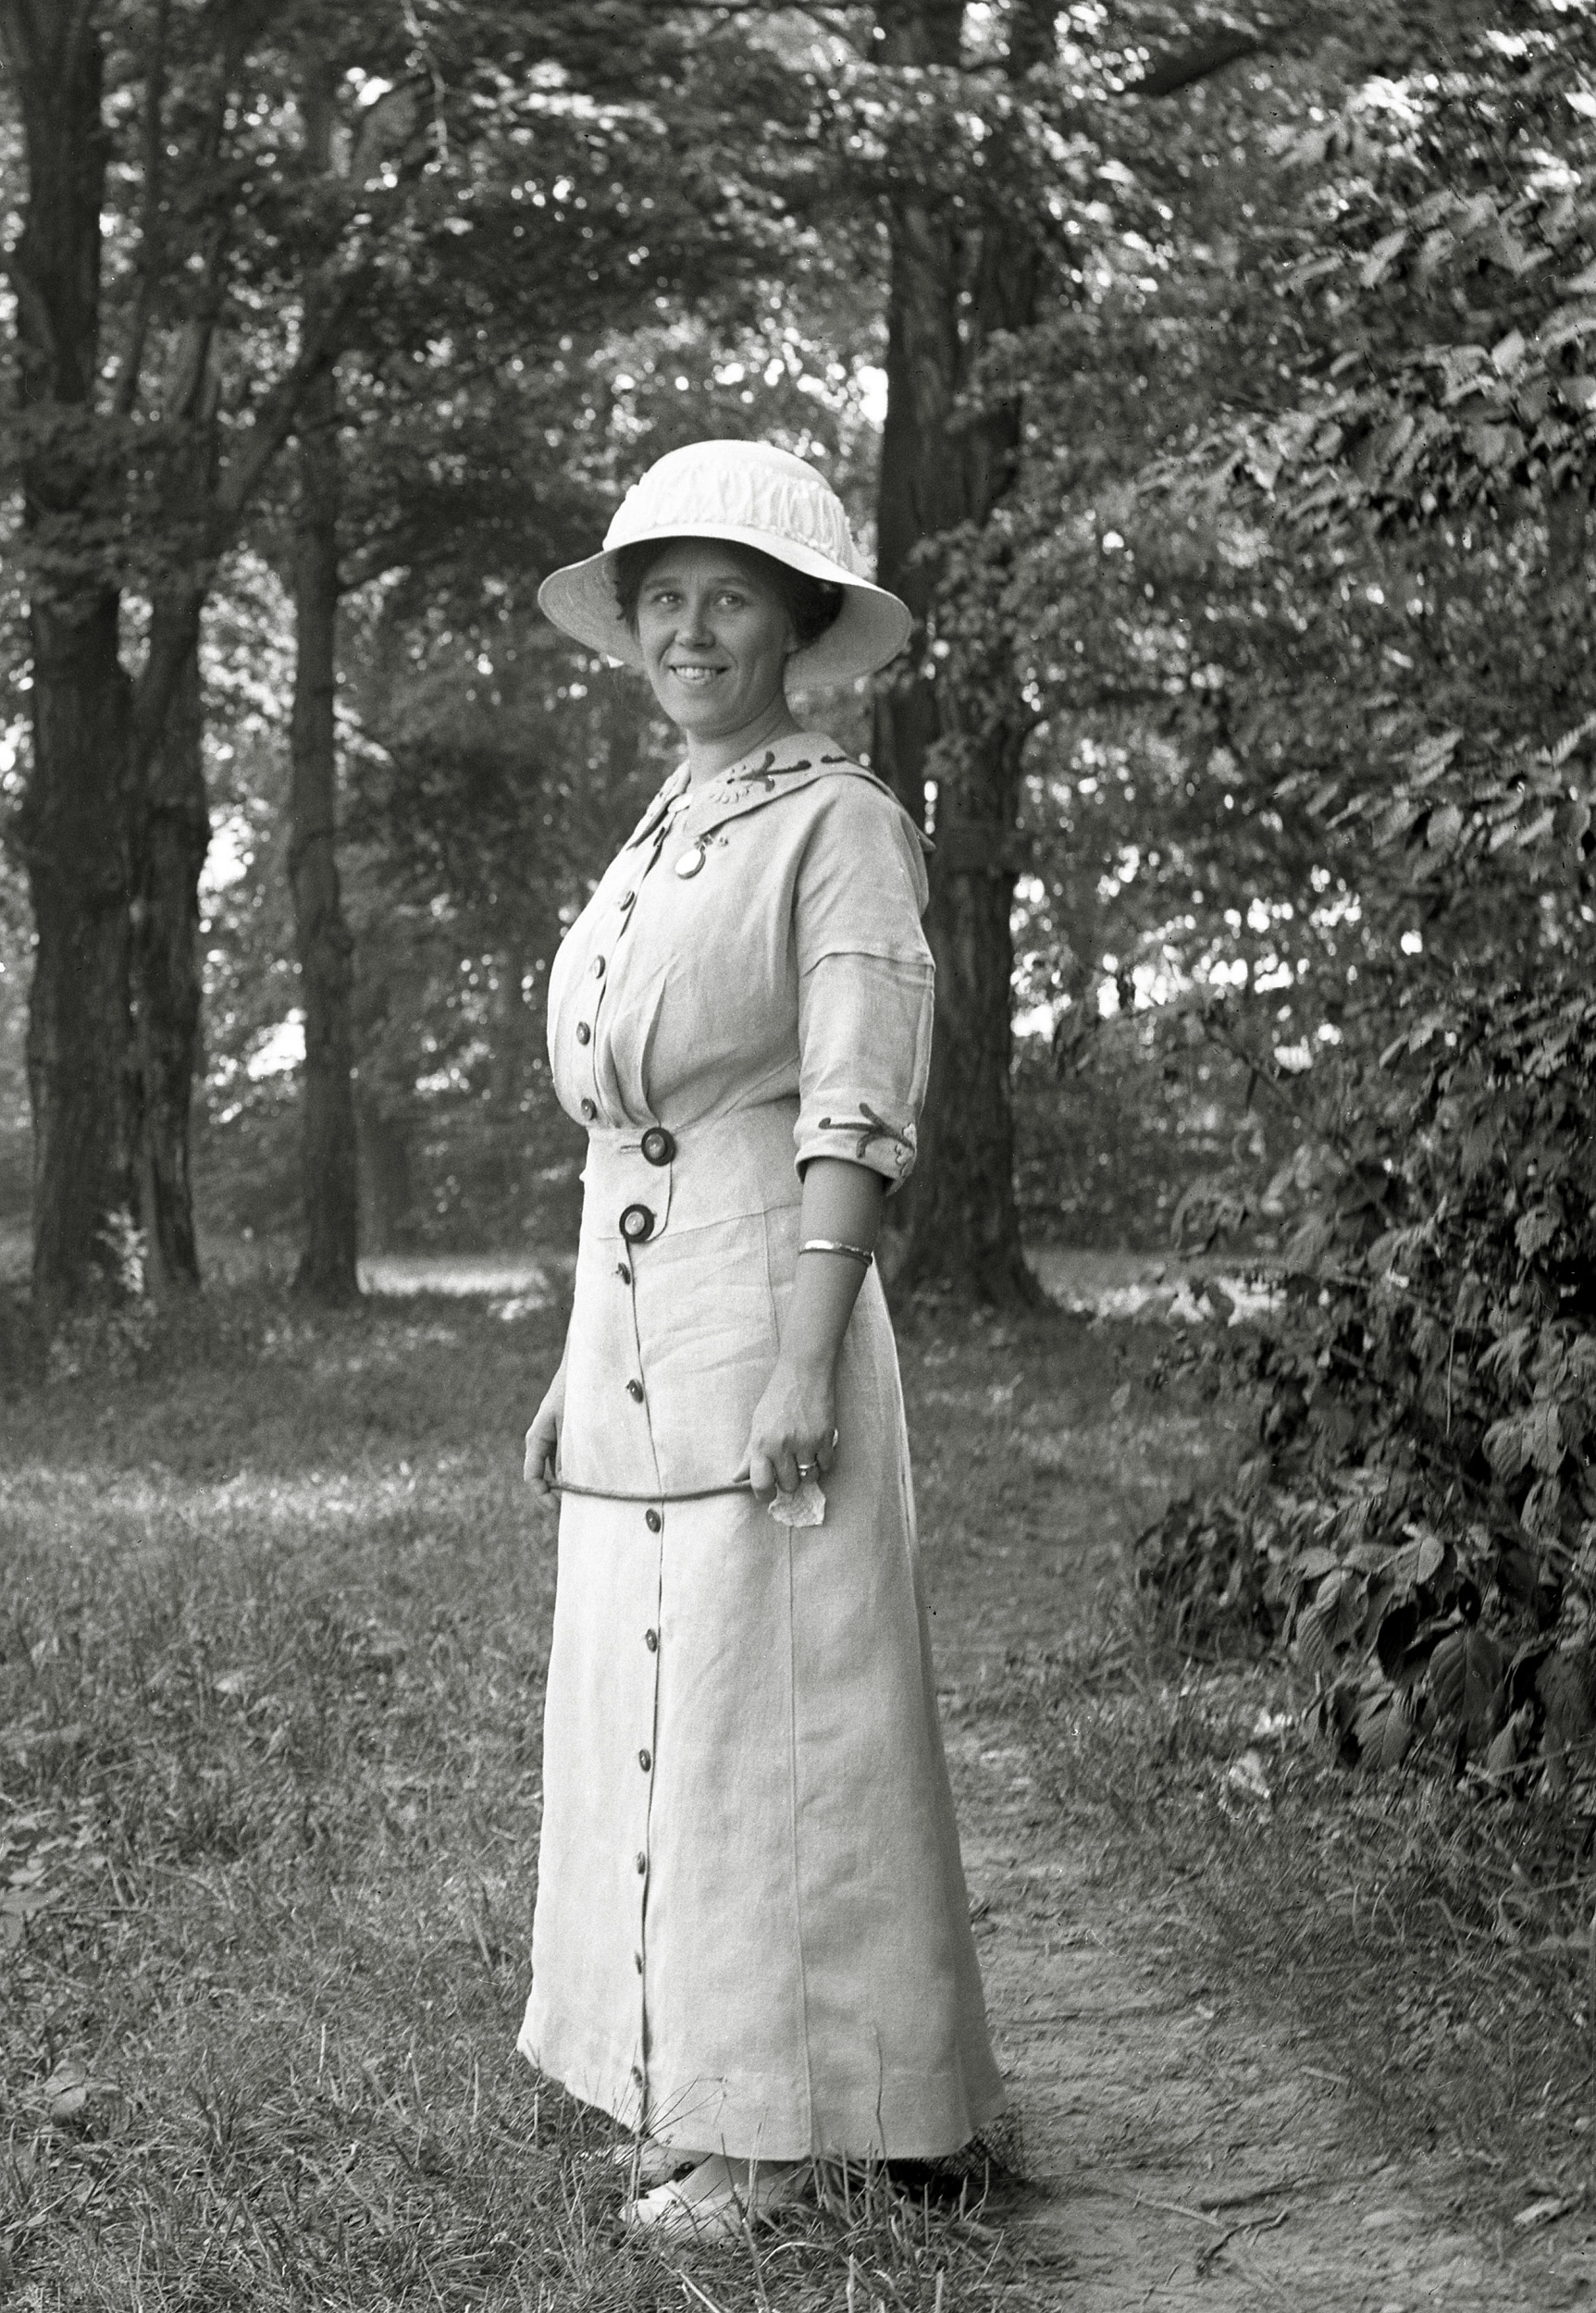 Another photo from the circa 1912 set of negatives I recently acquired that show more of our lady's wardrobe.  She enjoys posing for, I assume, her husband and most of the photos seem natural and unselfconscious.  Here is yet another of her outfits.  We have figured out that most of the pictures were taken around Trenton Falls, NY. View full size.